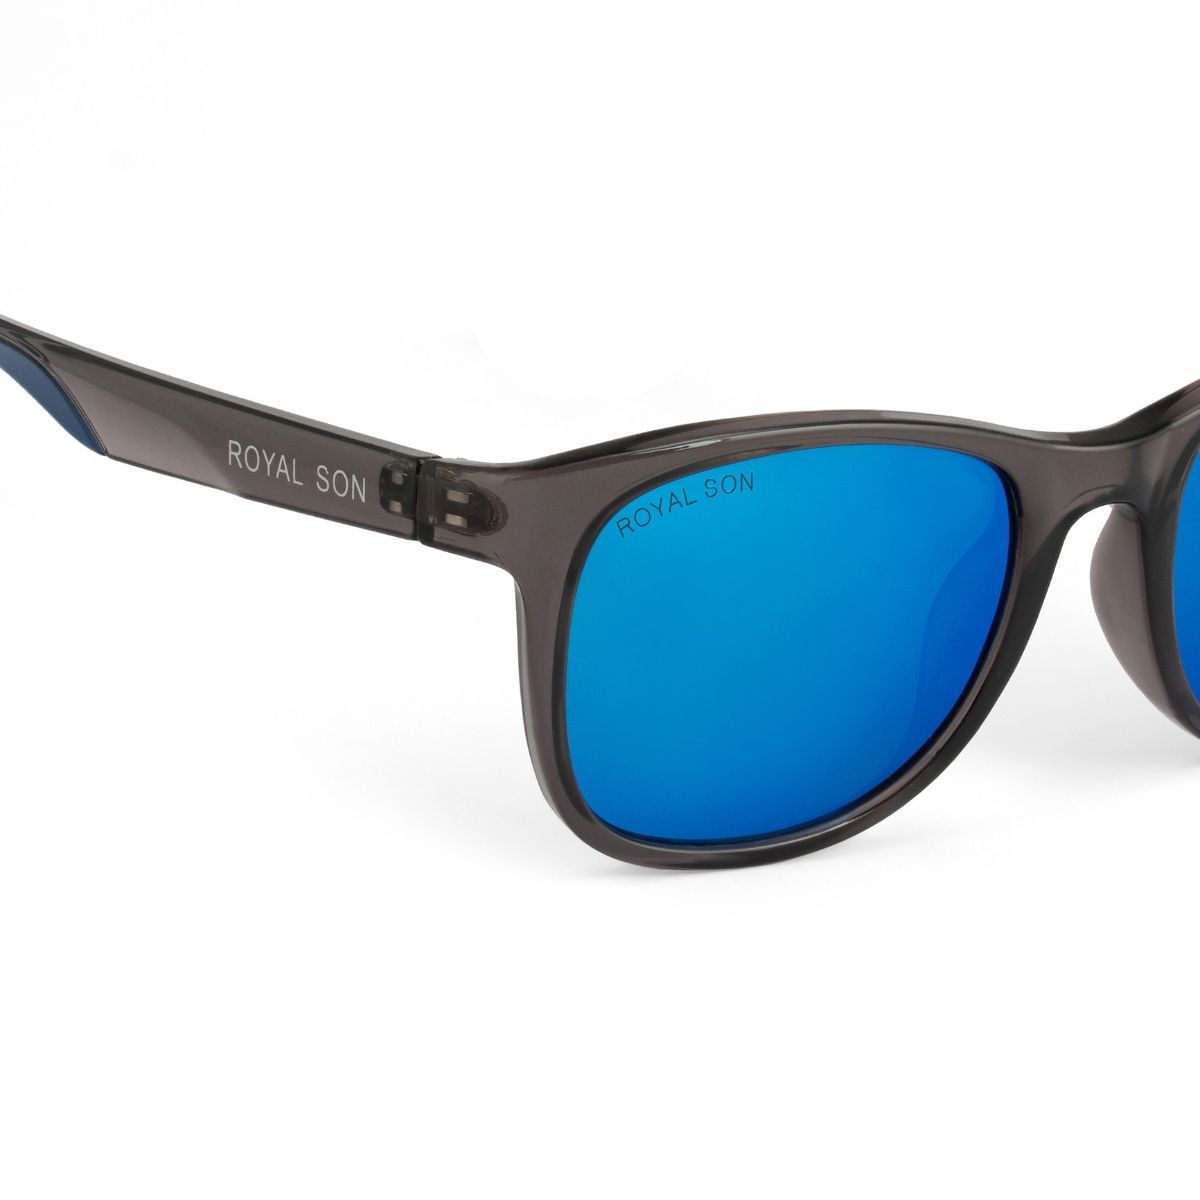 Buy India's Best Polarized Sunglasses and Goggles Drop Prices!